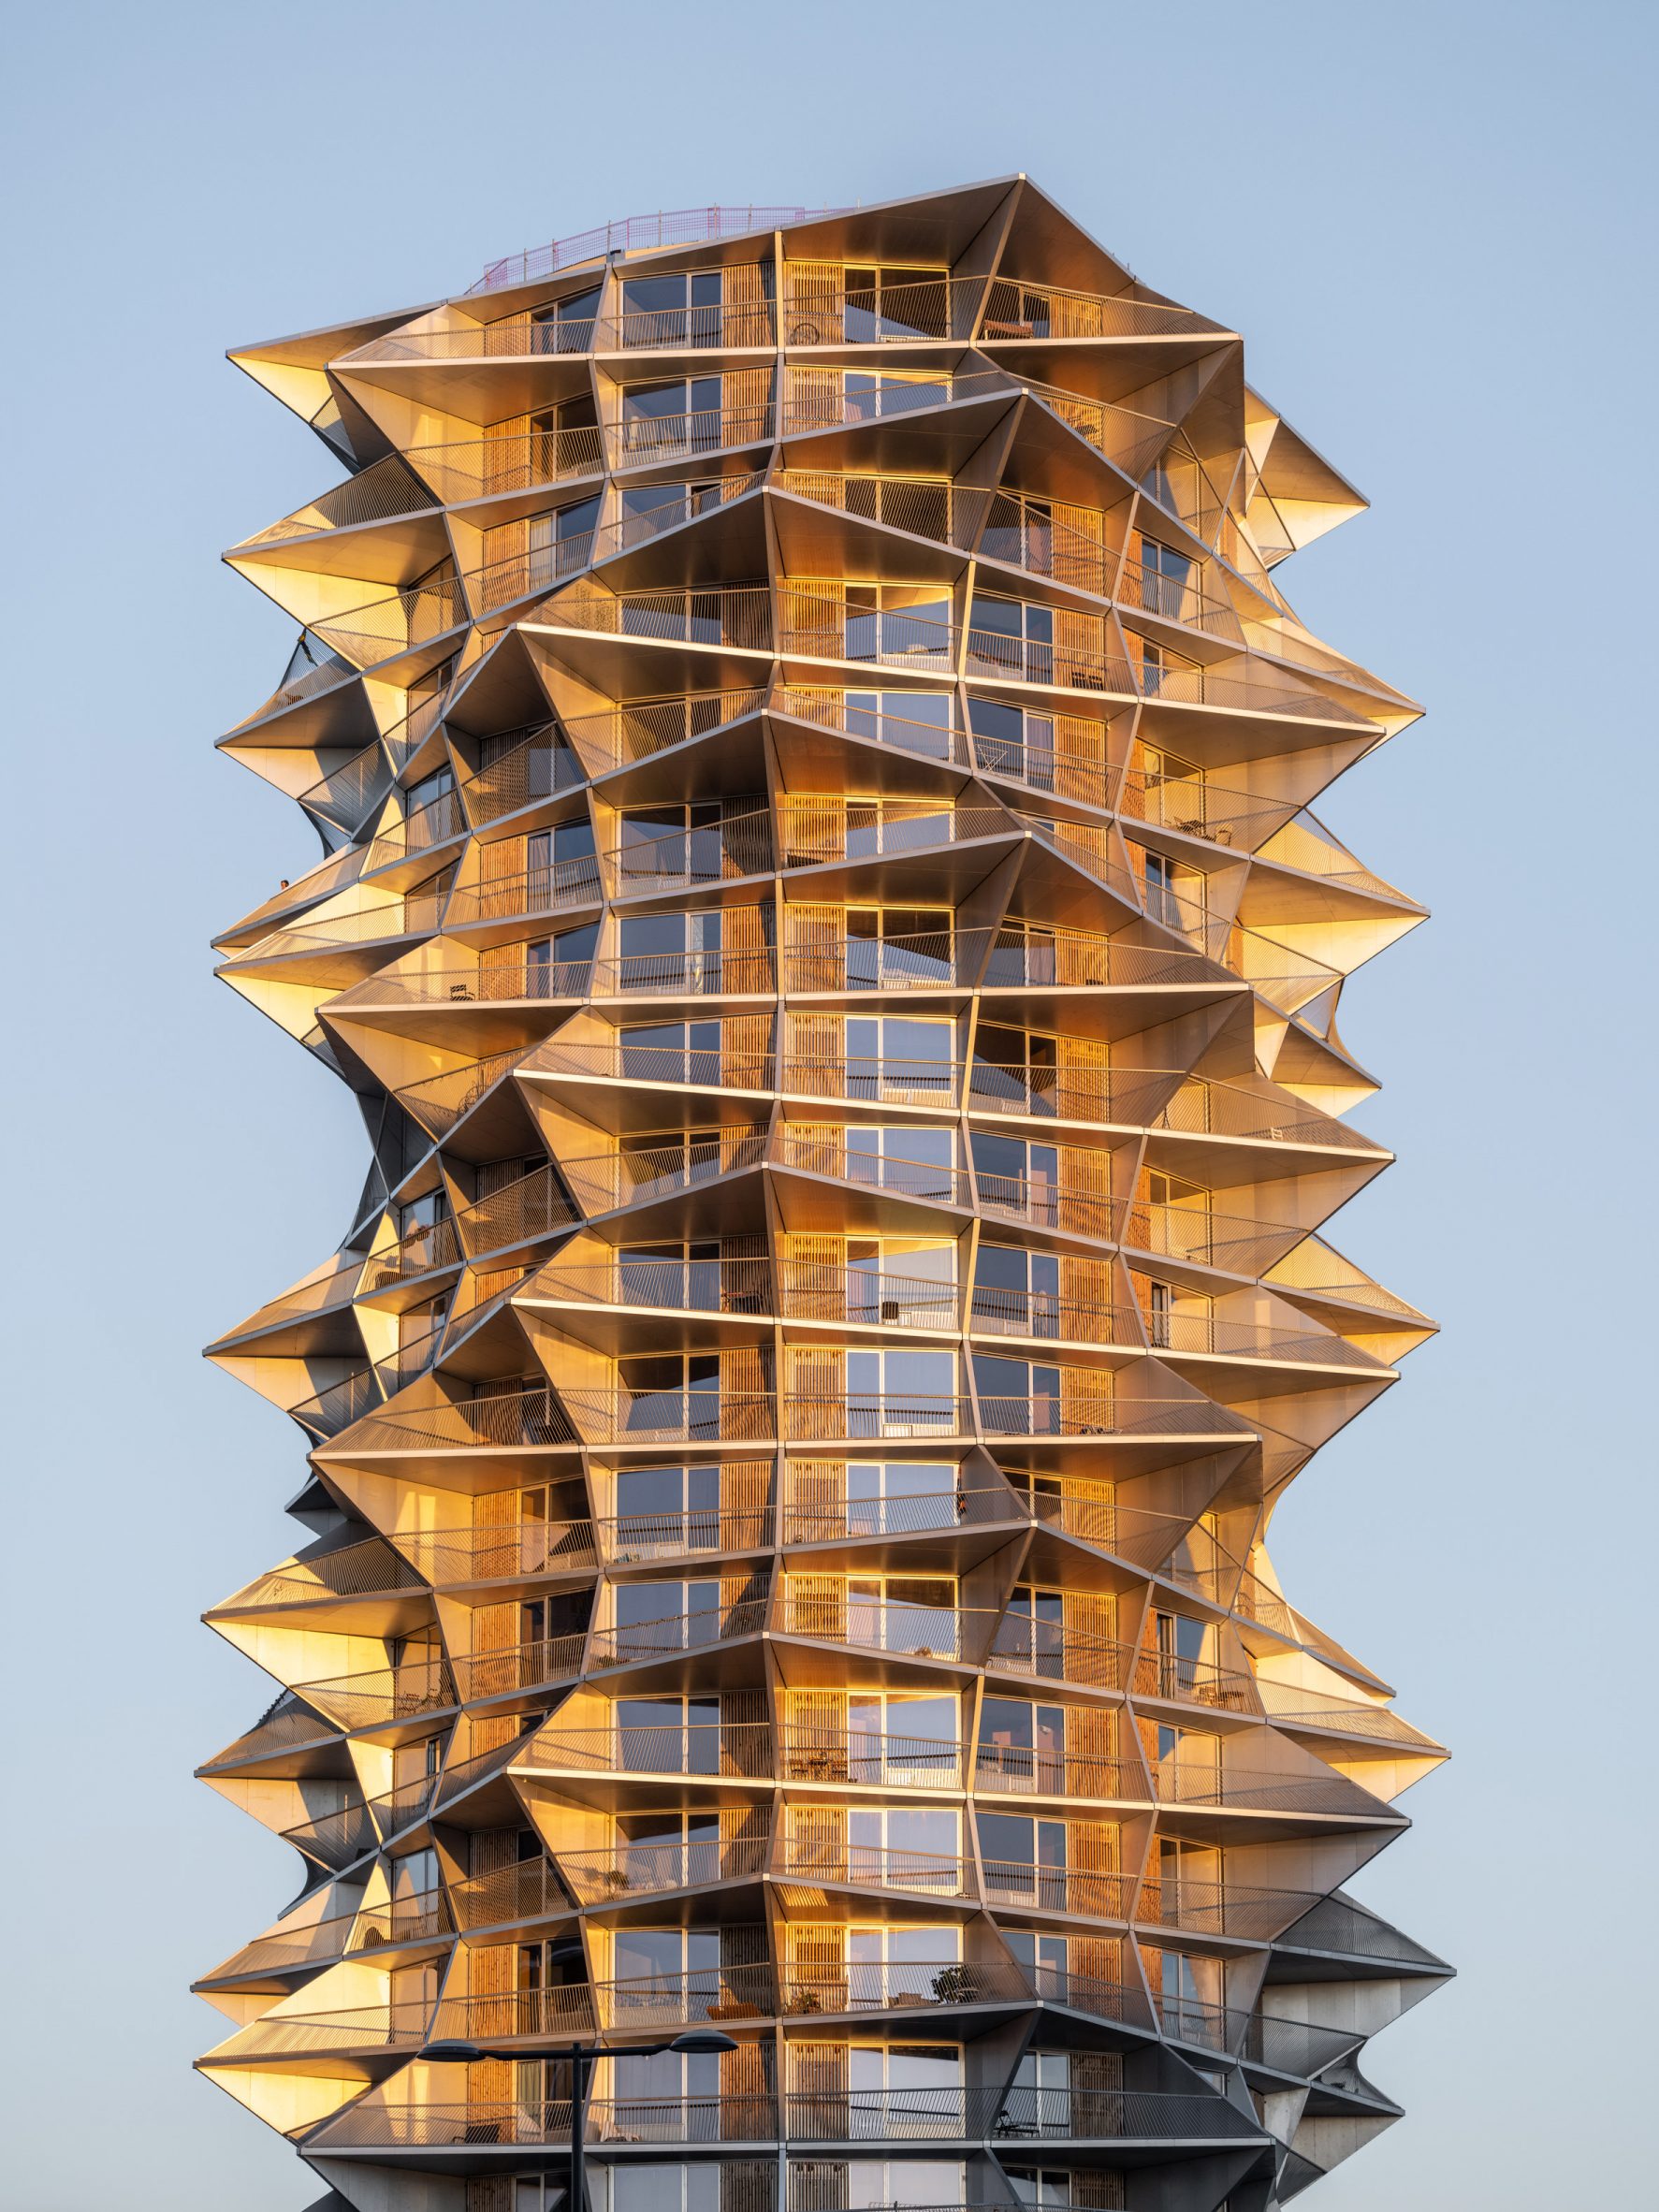 Spikey-looking high-rise building in Copenhagen by BIG